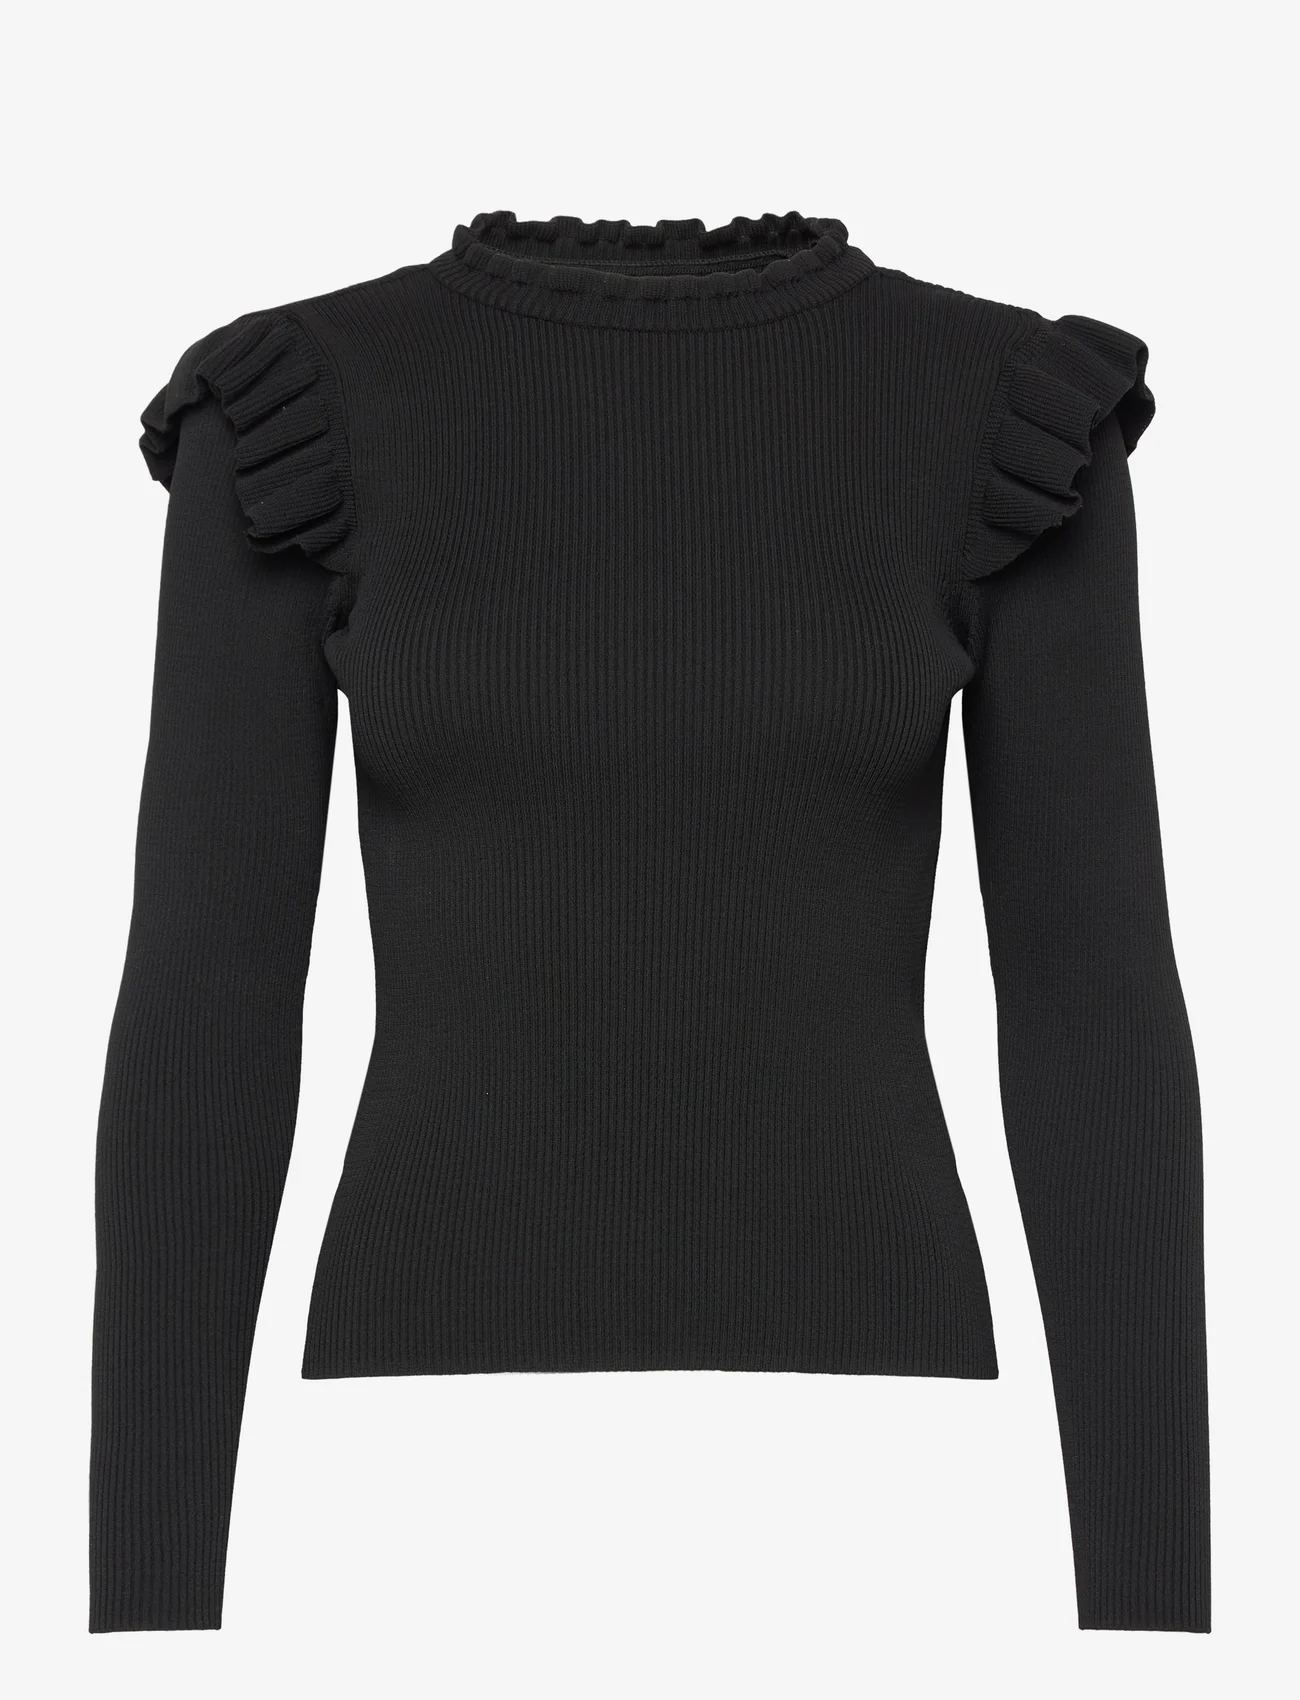 ONLY - ONLSIA SALLY RUFFLE LS PULLOVER KNT - lowest prices - black - 0